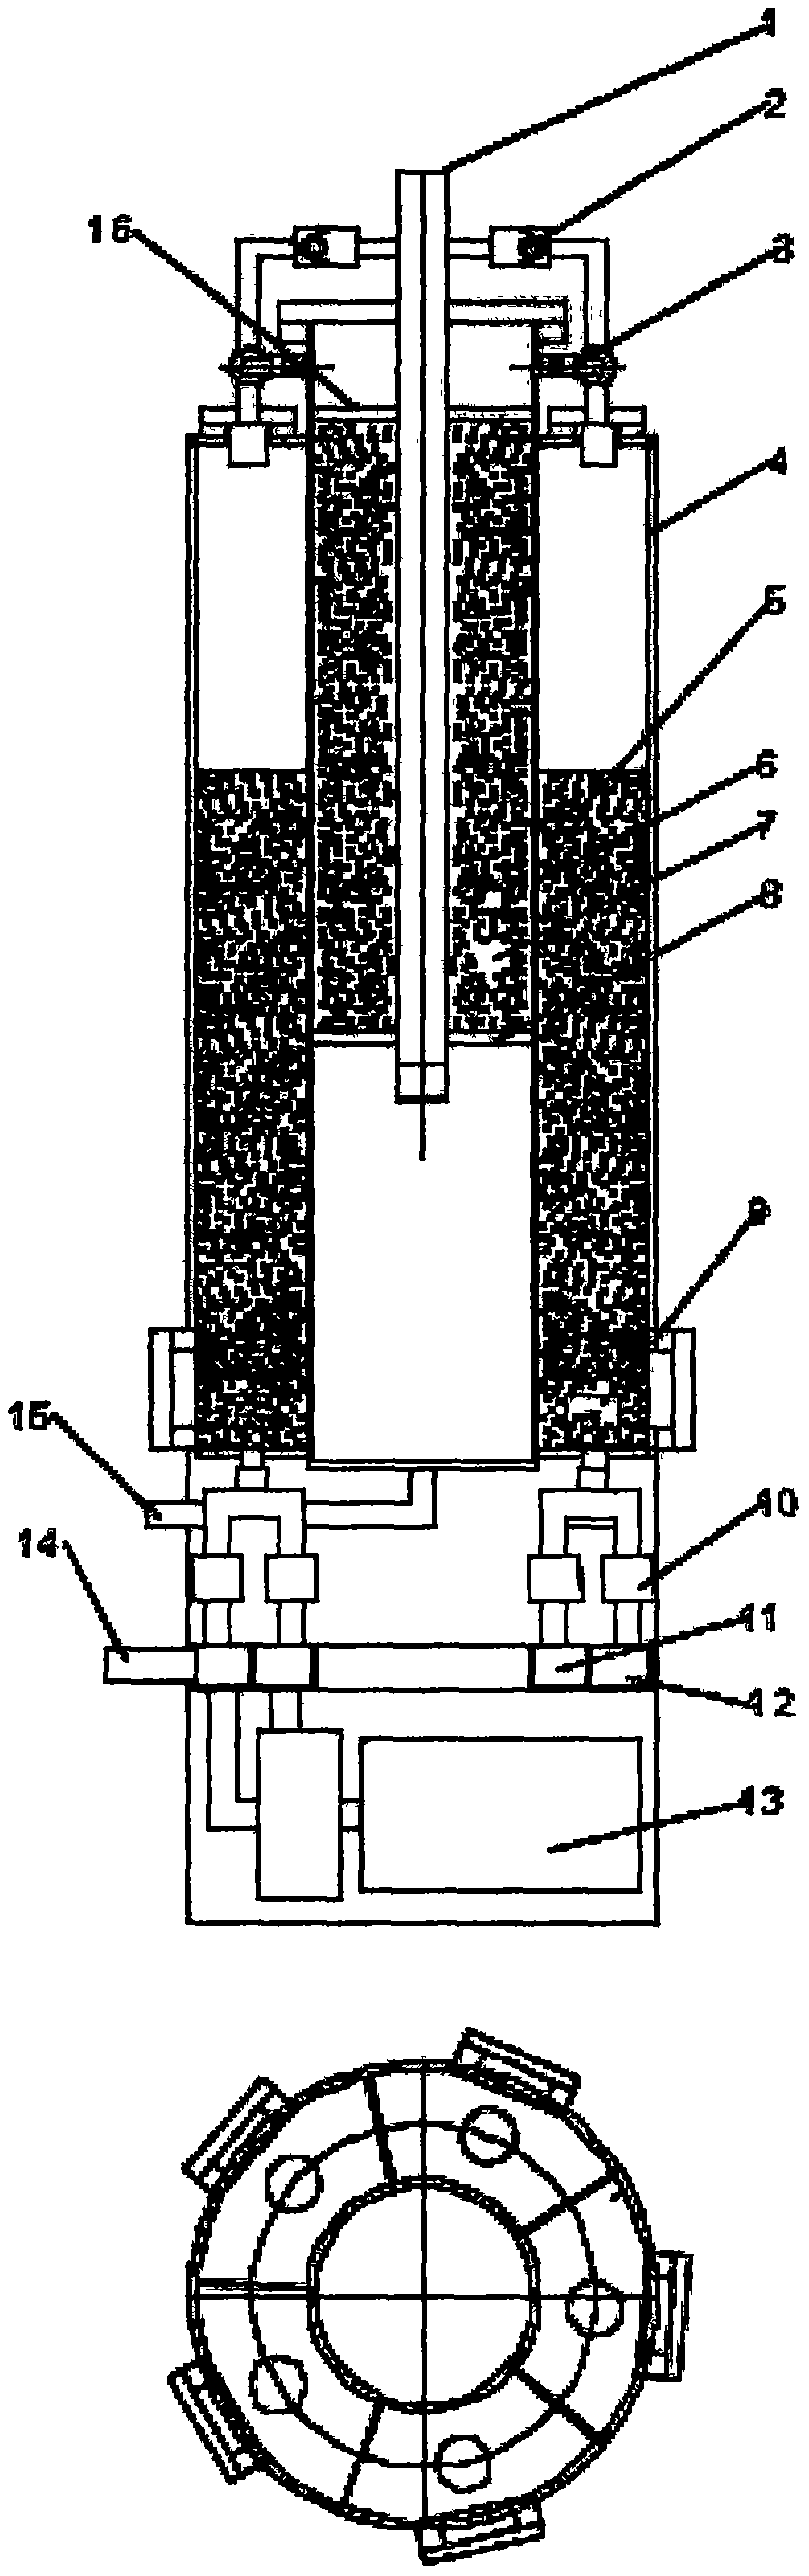 Online self-cleaning medium filtering device